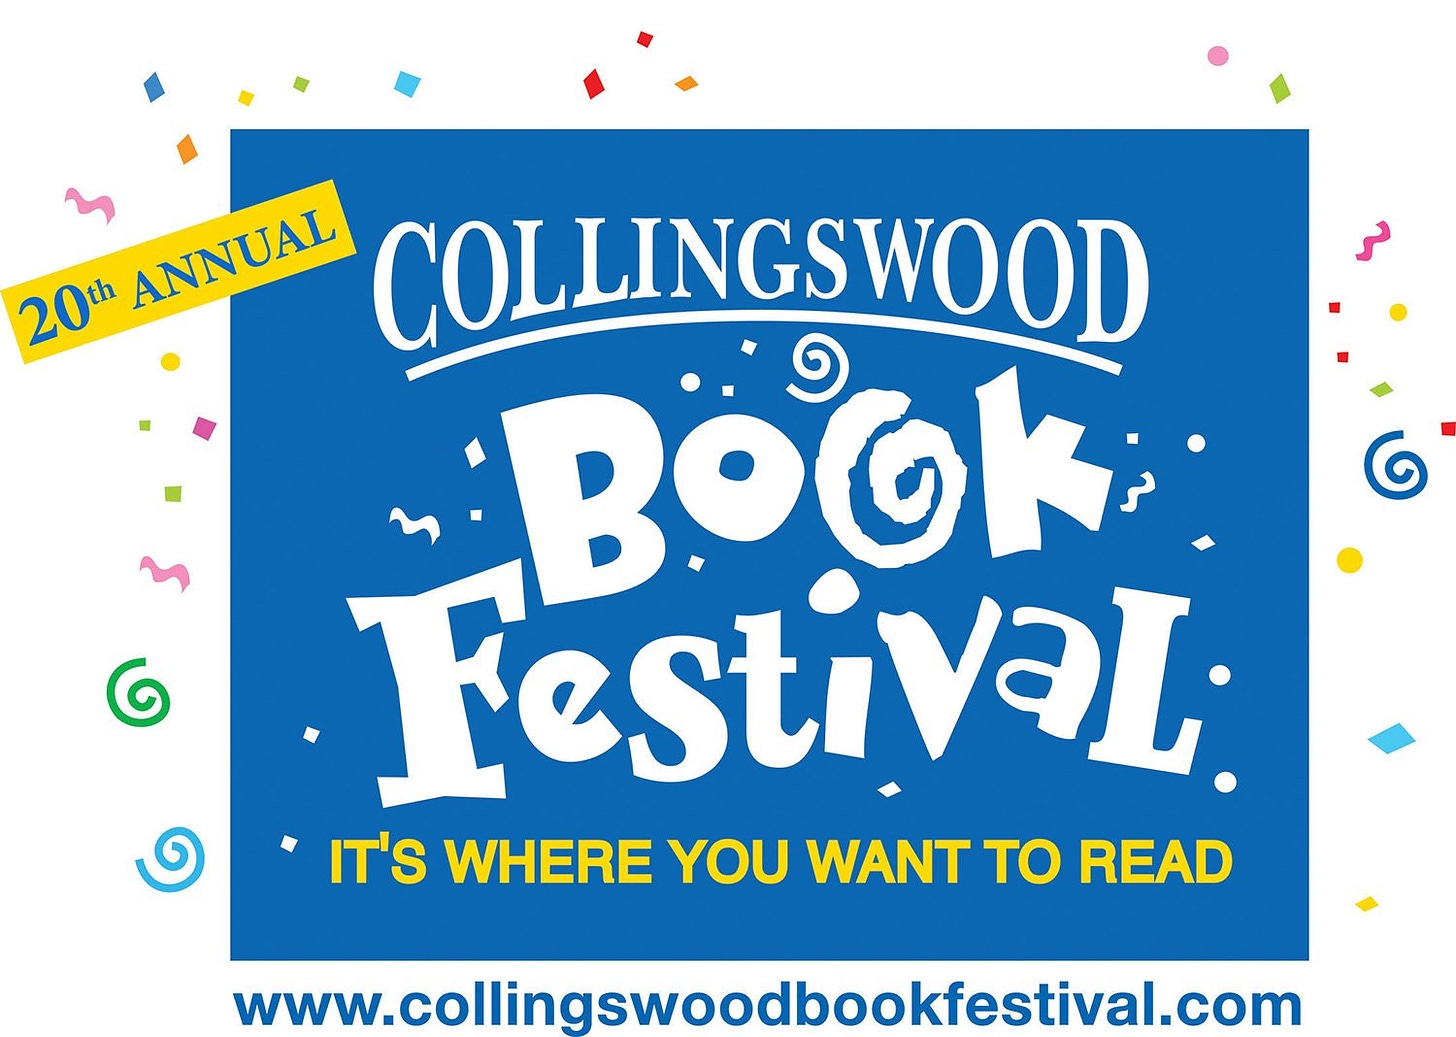 COLLINGSWOOD BOOK FESTIVAL